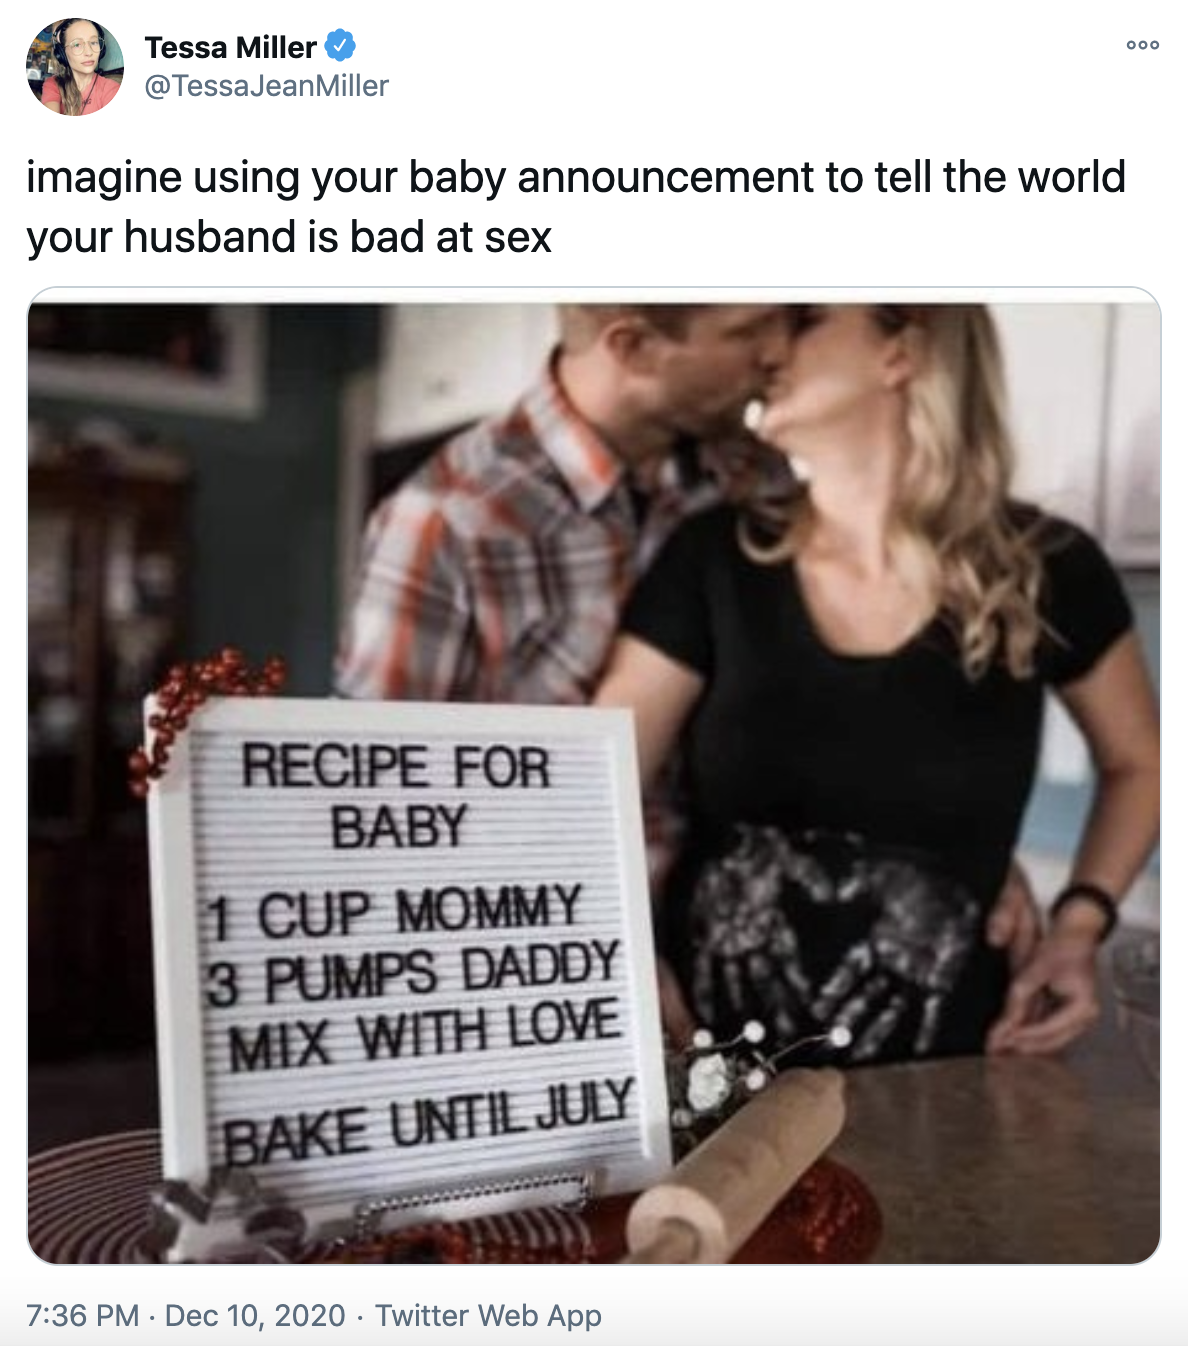 3 Pumps Daddy Is the Worst Pregnancy Announcement